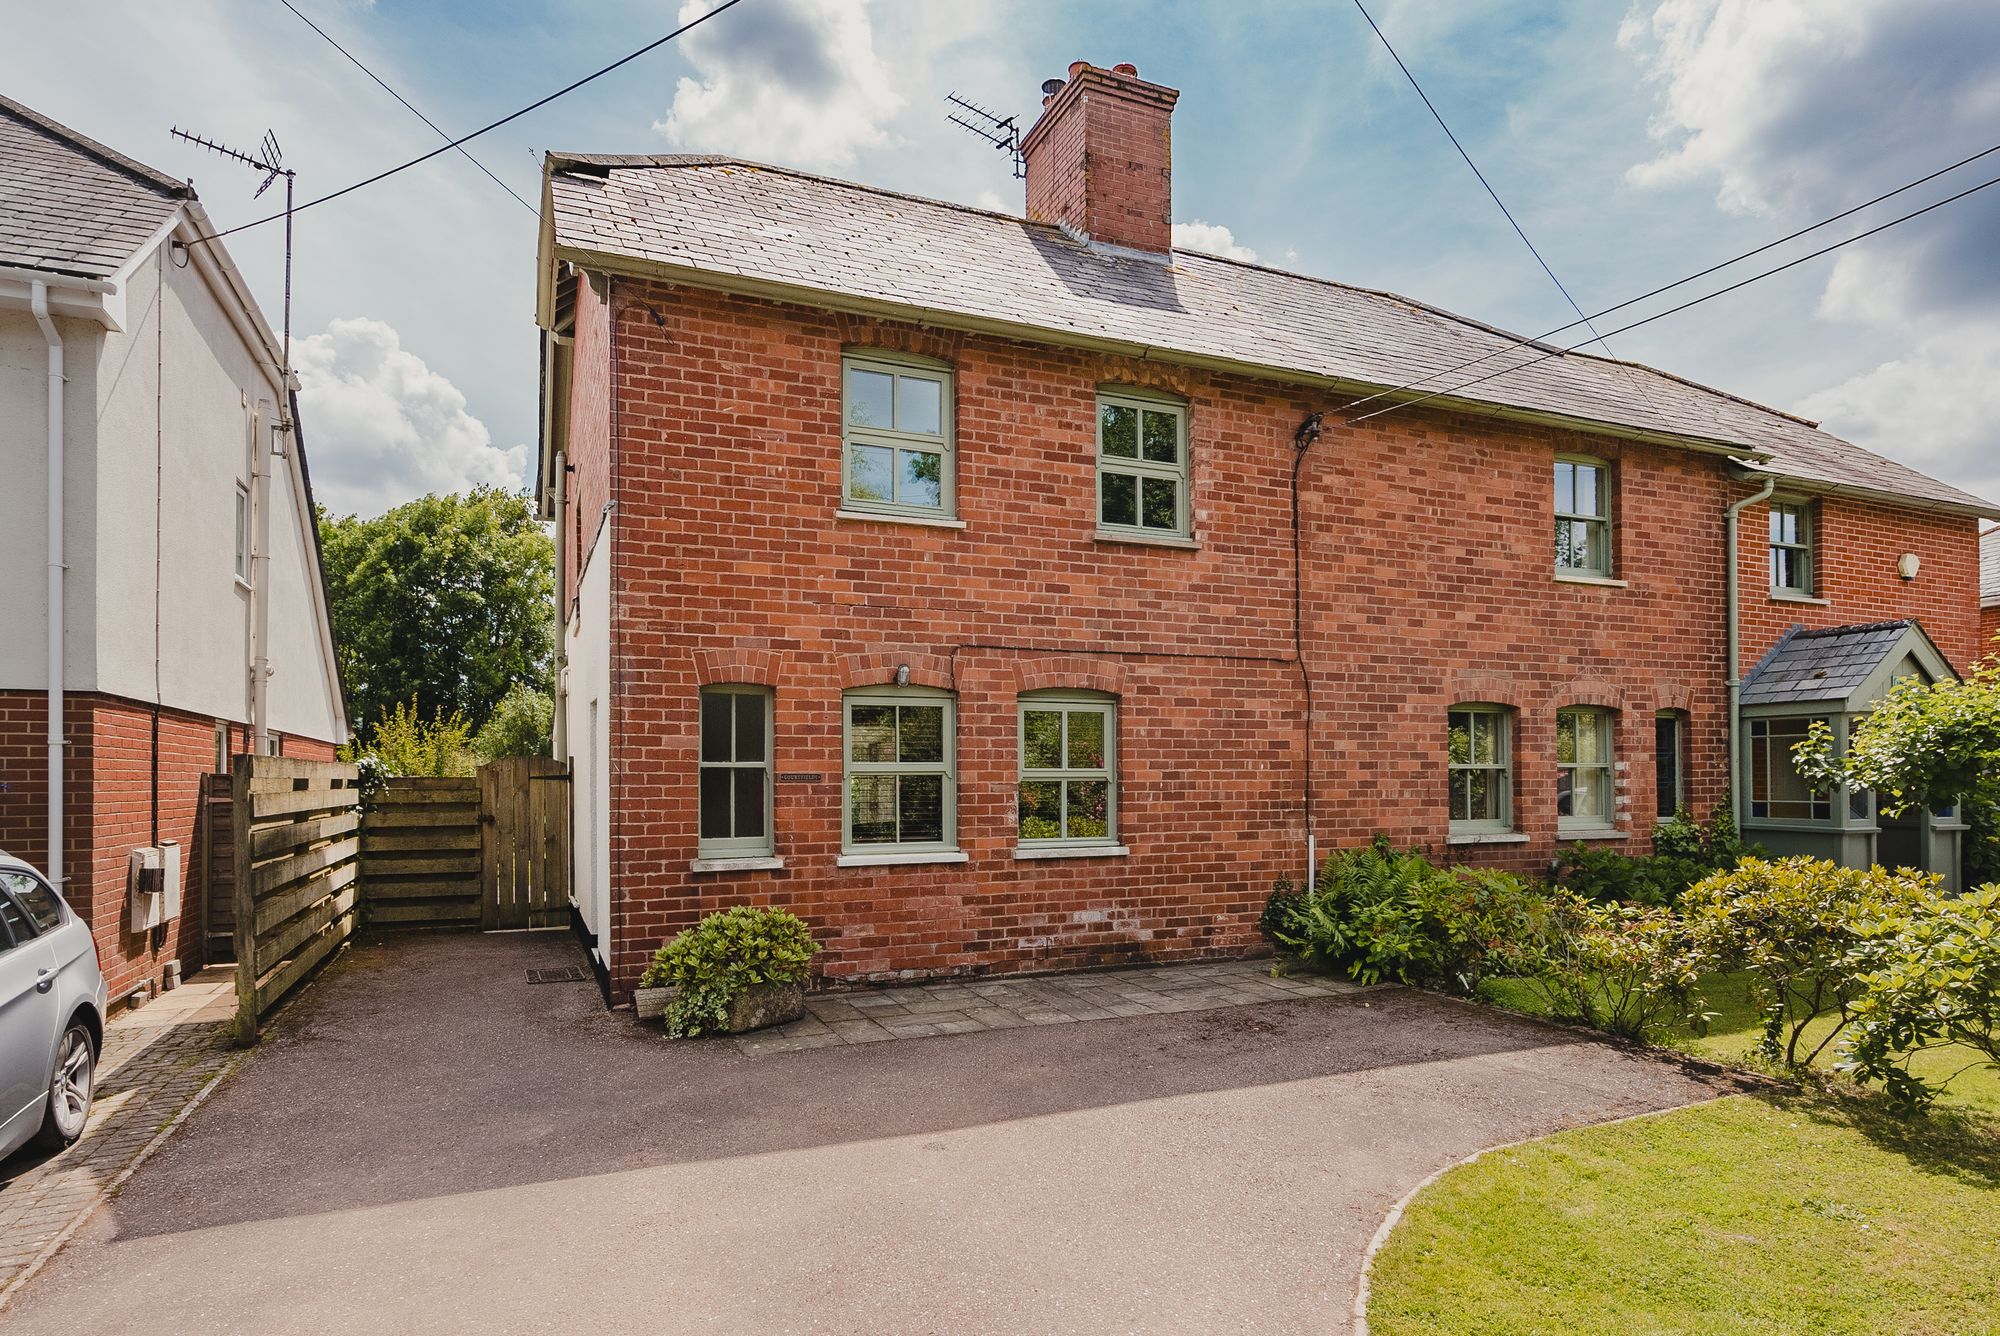 3 bed semi-detached house for sale in Newton St. Cyres, Exeter  - Property Image 1